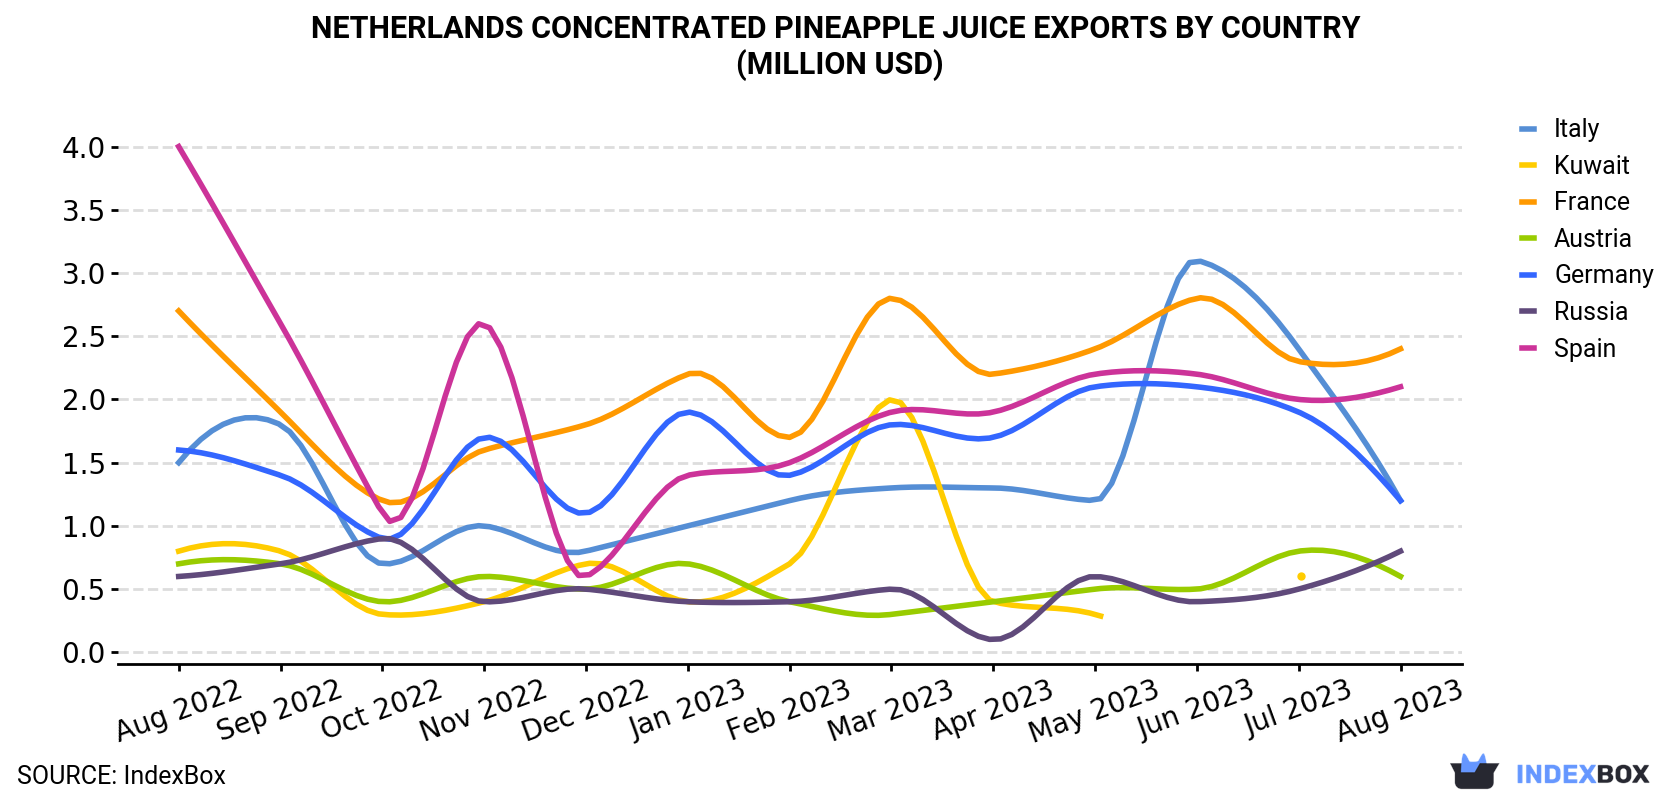 Netherlands Concentrated Pineapple Juice Exports By Country (Million USD)